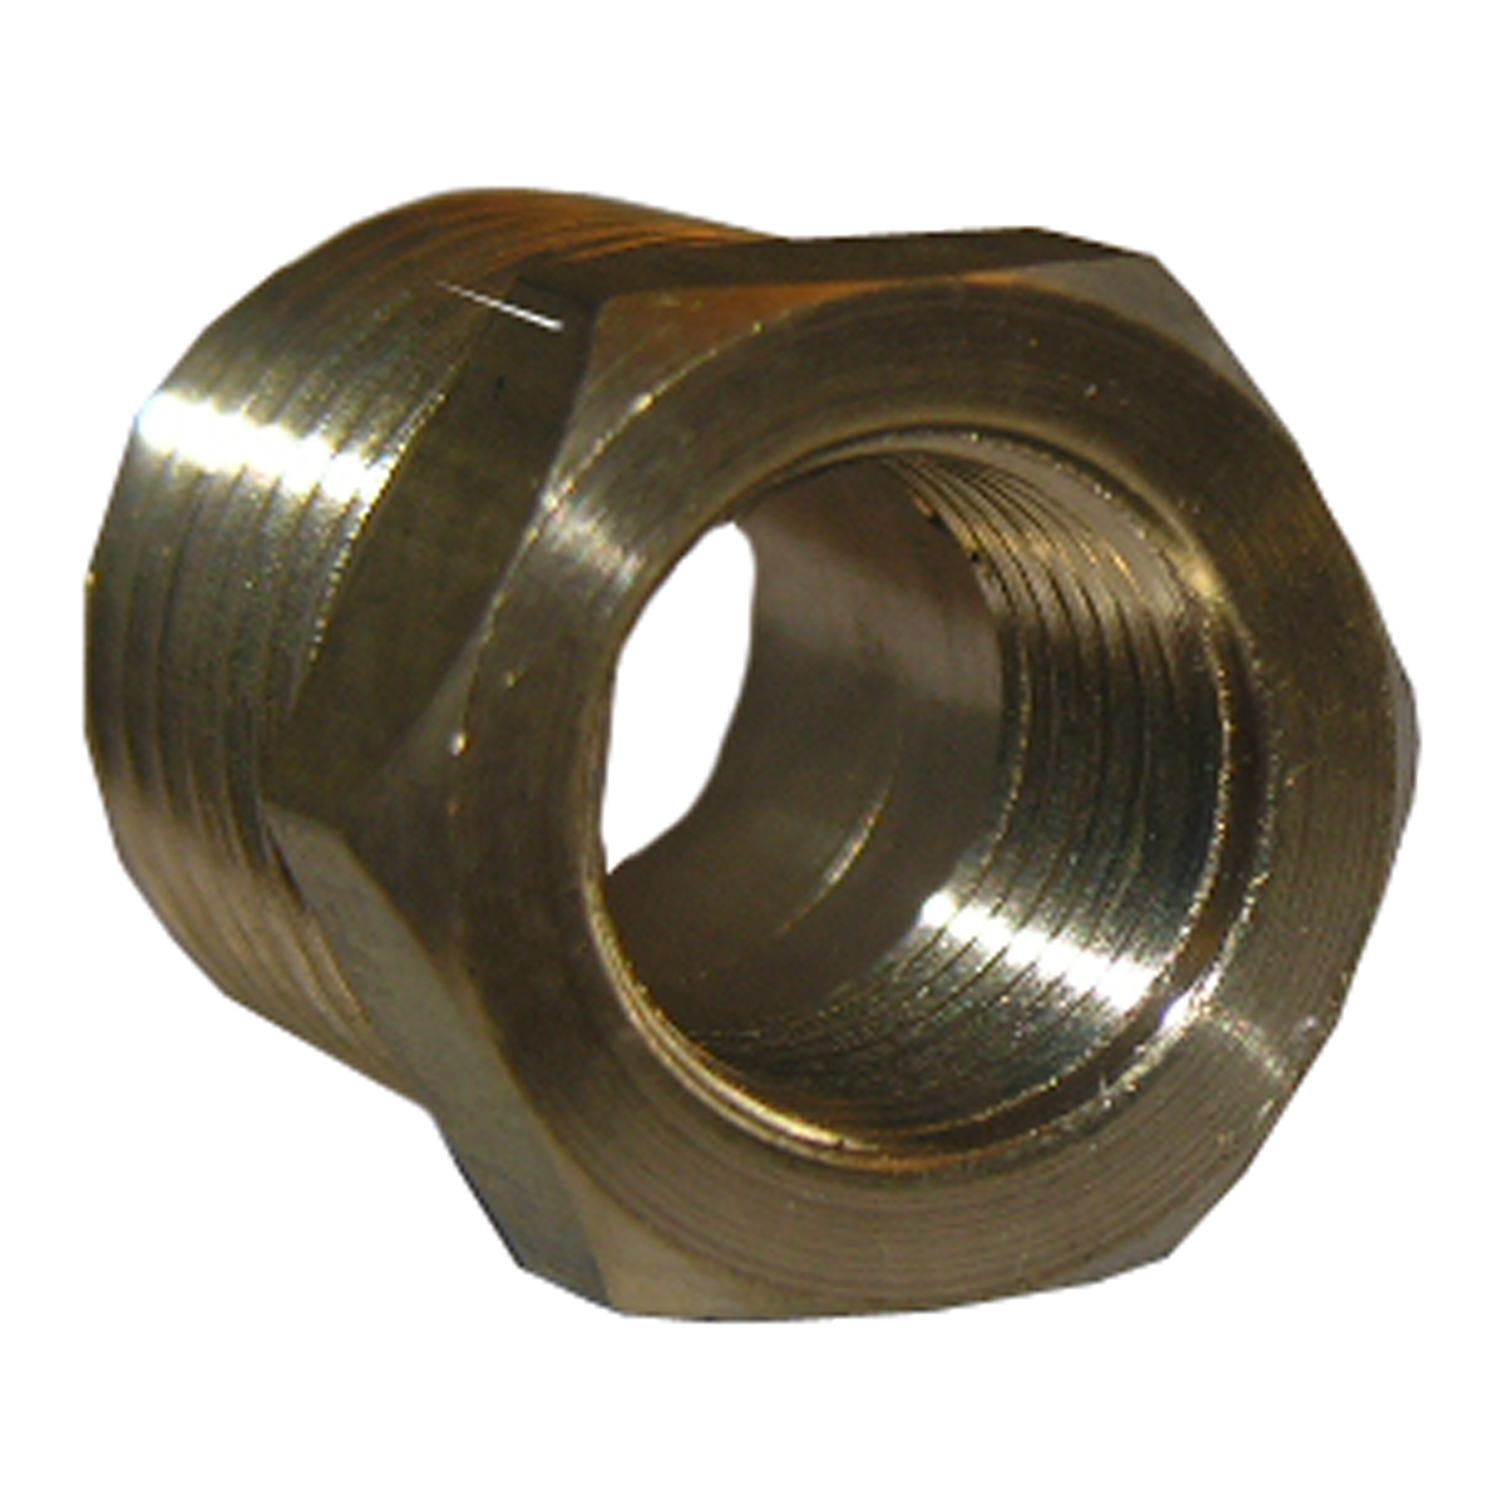 17-9241 Hex Pipe Bushing, 1/4 x 1/8 in, MPT x FPT, Brass, 125 psi Pressure